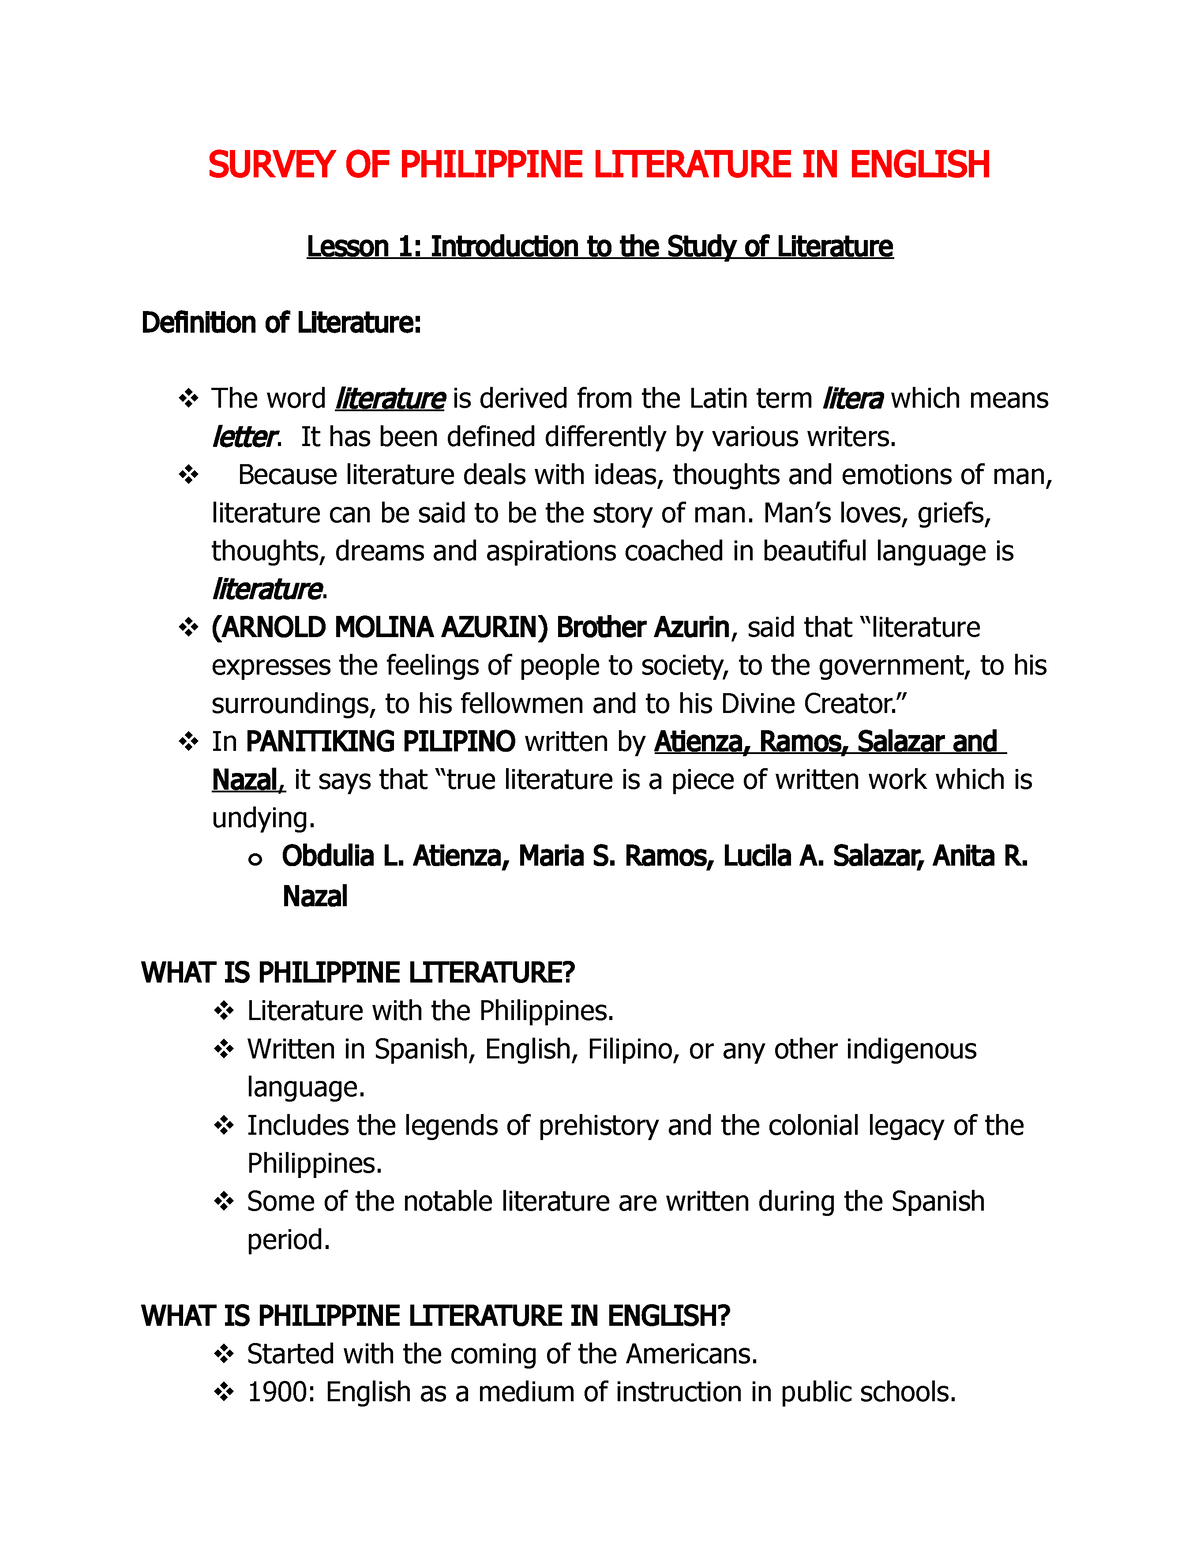 essay about the history of philippine literature